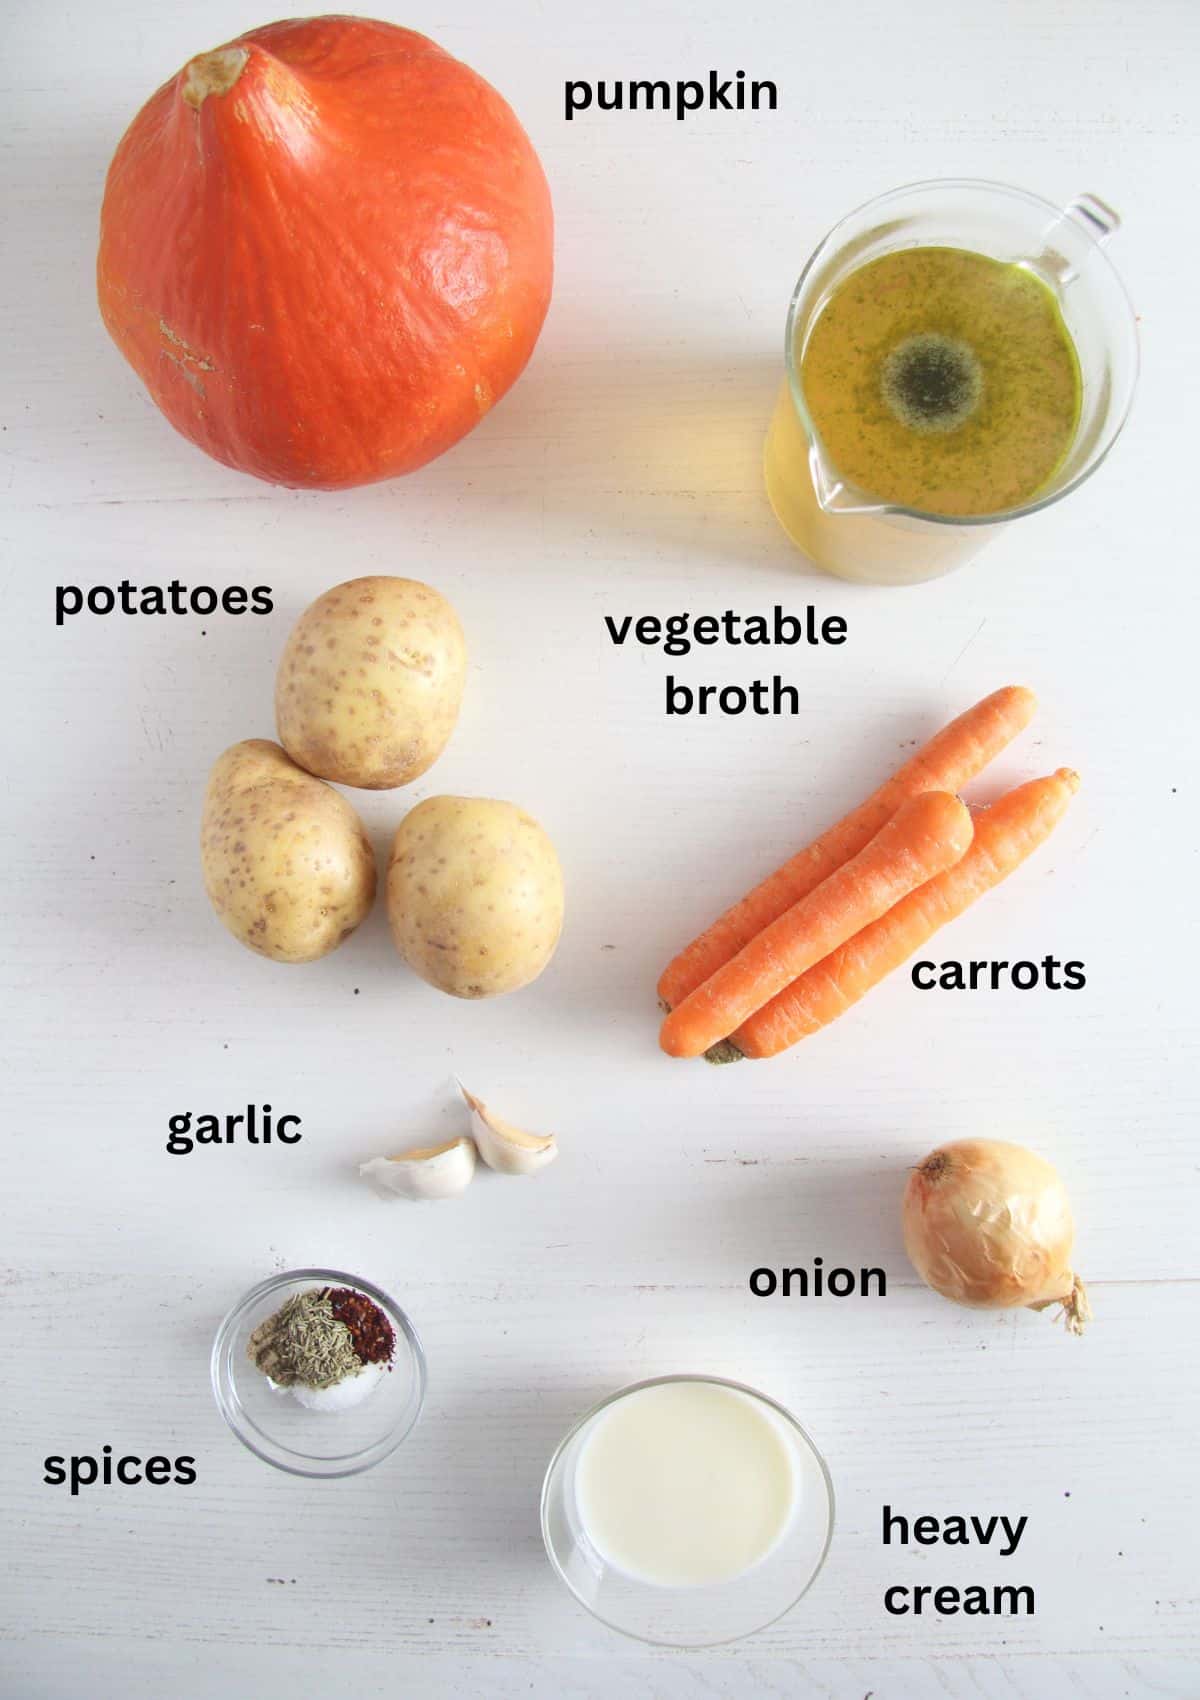 listed ingredients for making soup with pumpkin, carrots, and potatoes.